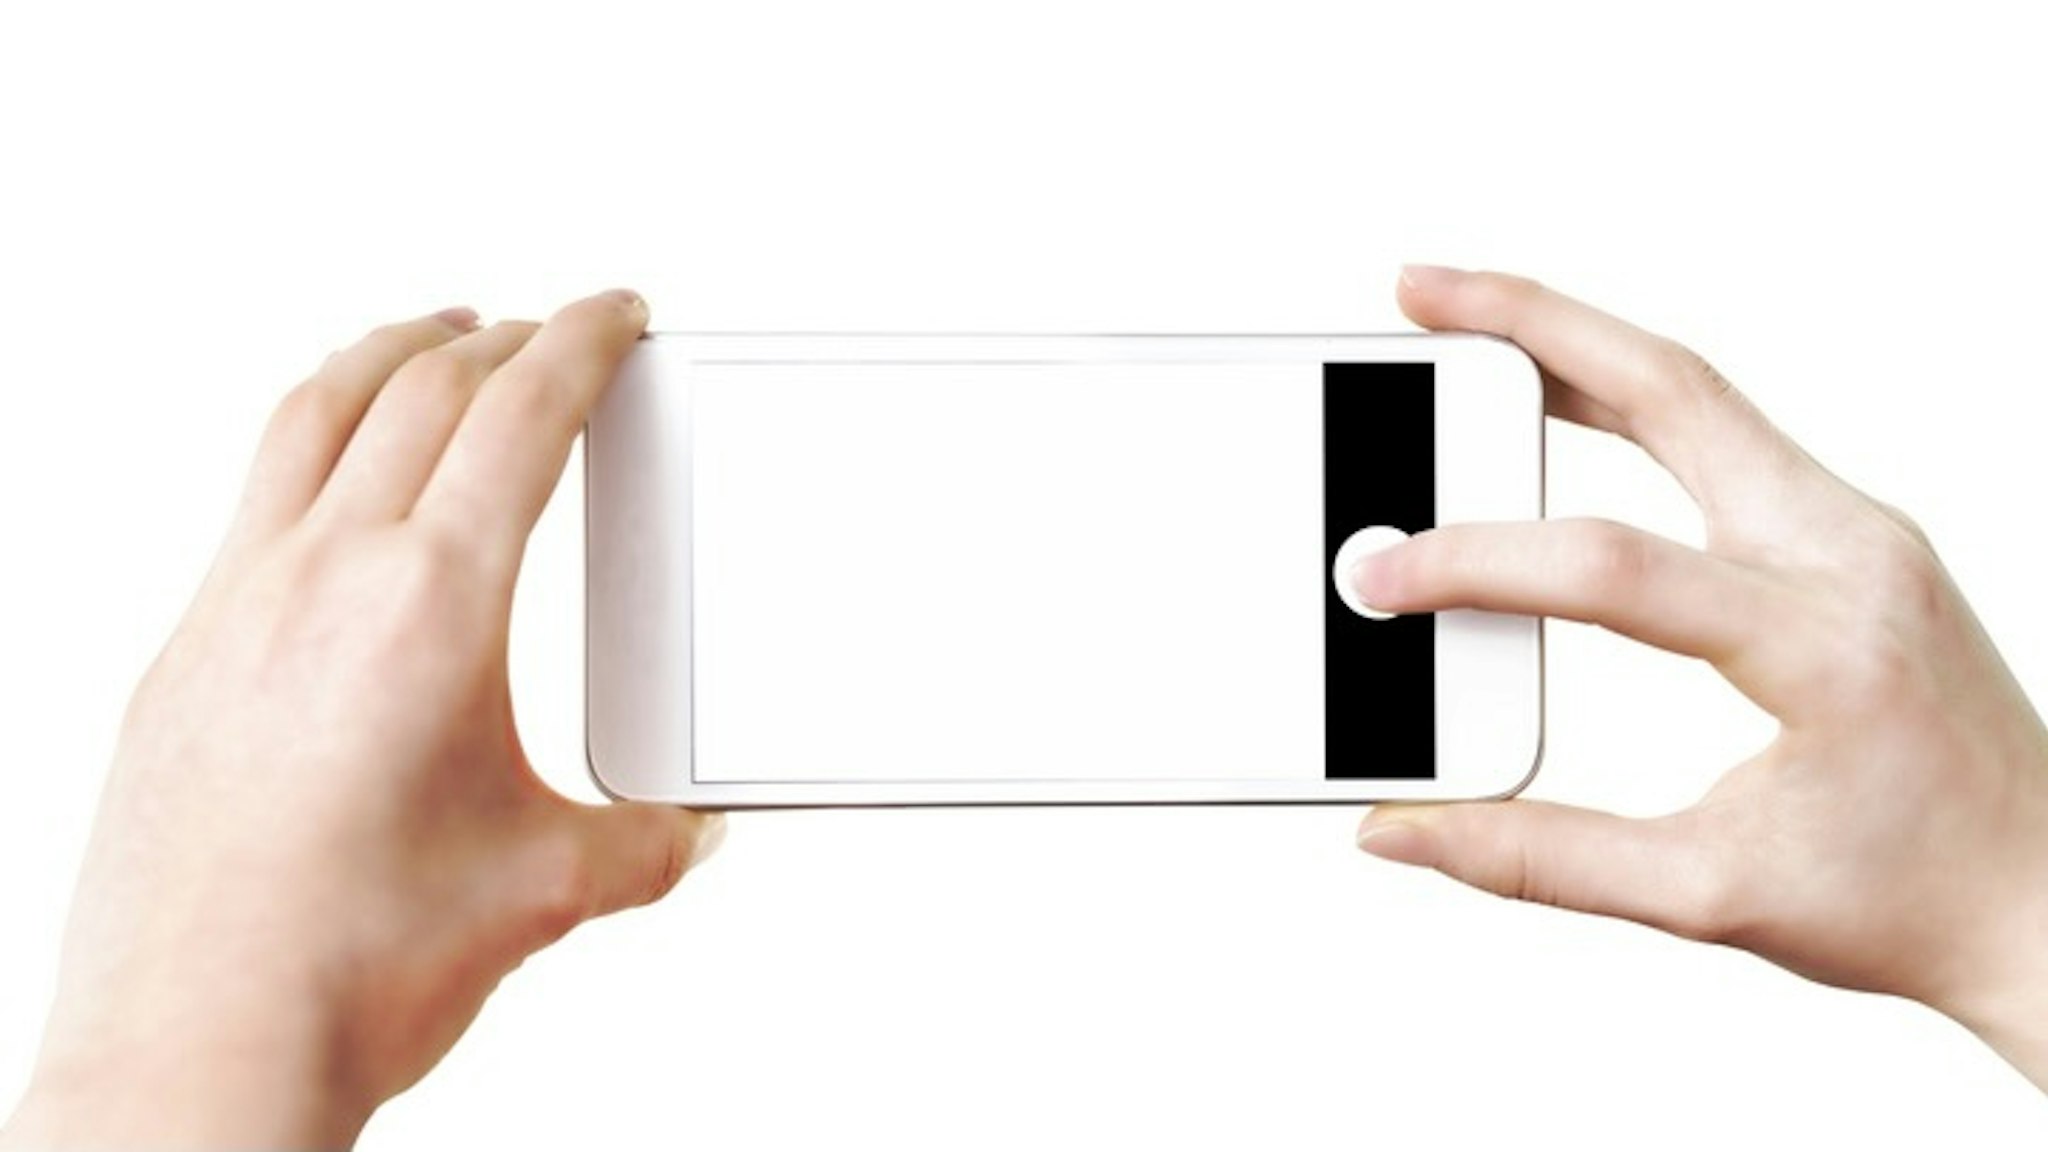 Making photos on smartphone - stock photo Mock-up of making photo on a smartphone - woman's hands holding mobile phone and touching screen isolated on white background WDnet via Getty Images